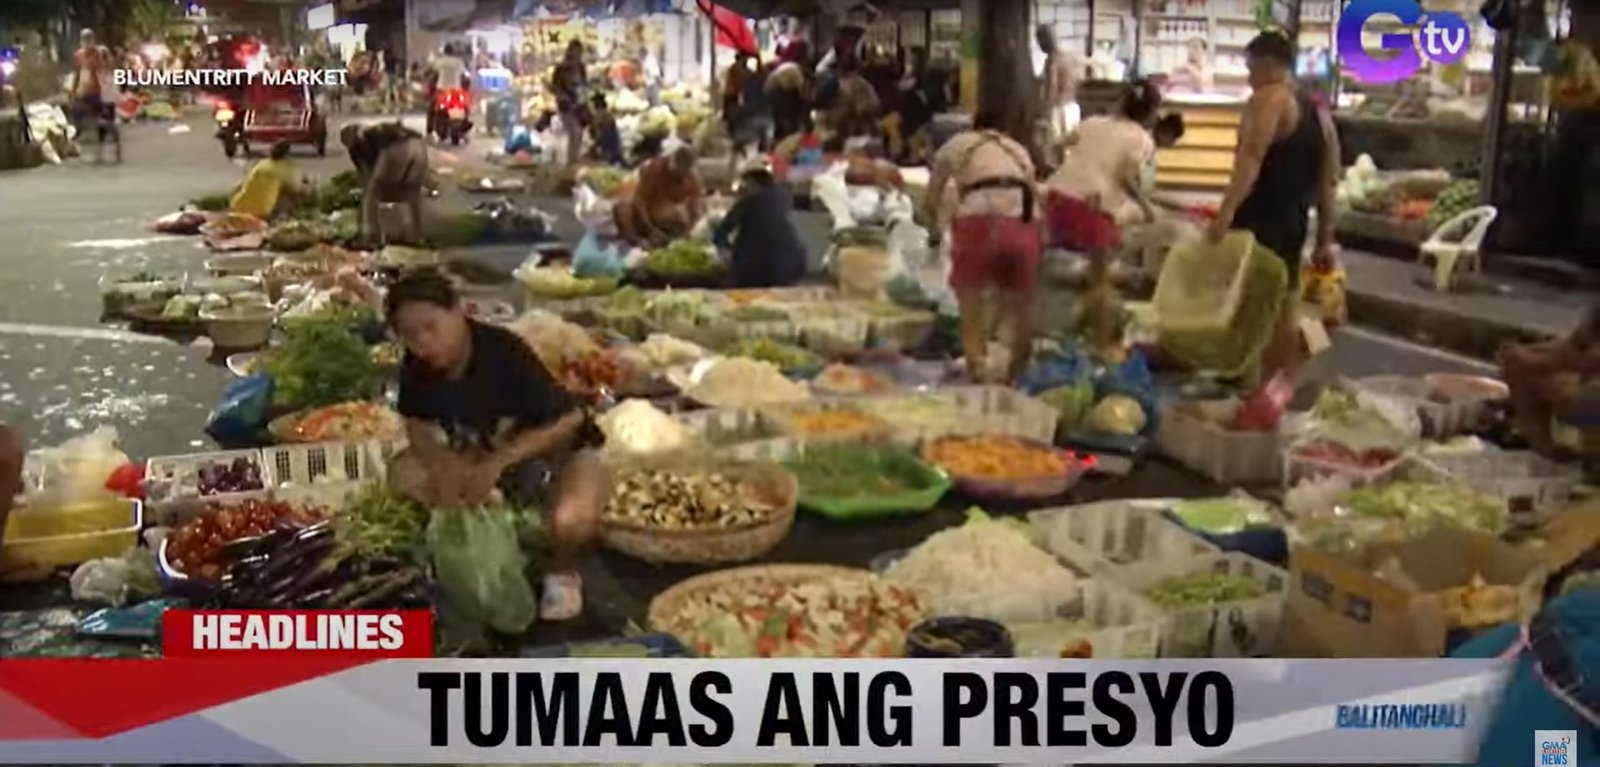 DA: Vegetable prices up due to Aghon but supply sufficient